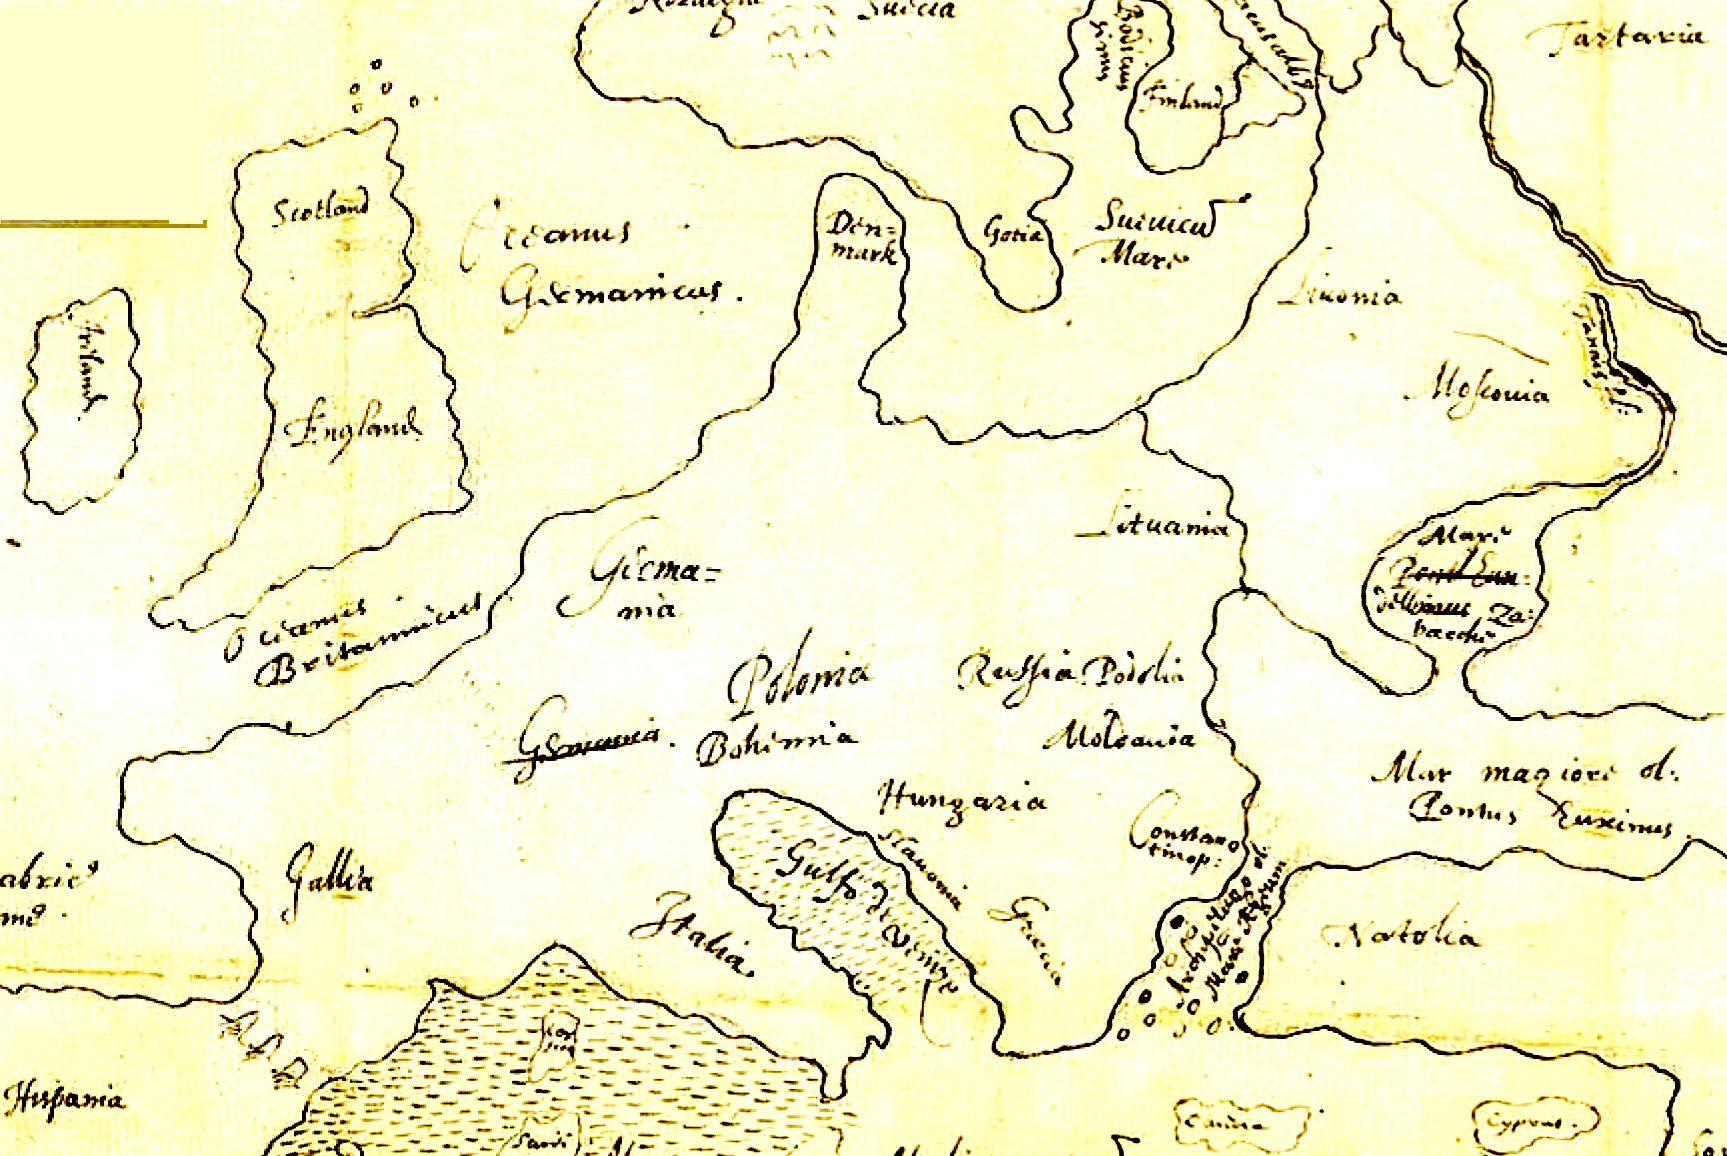 part of 16thc map